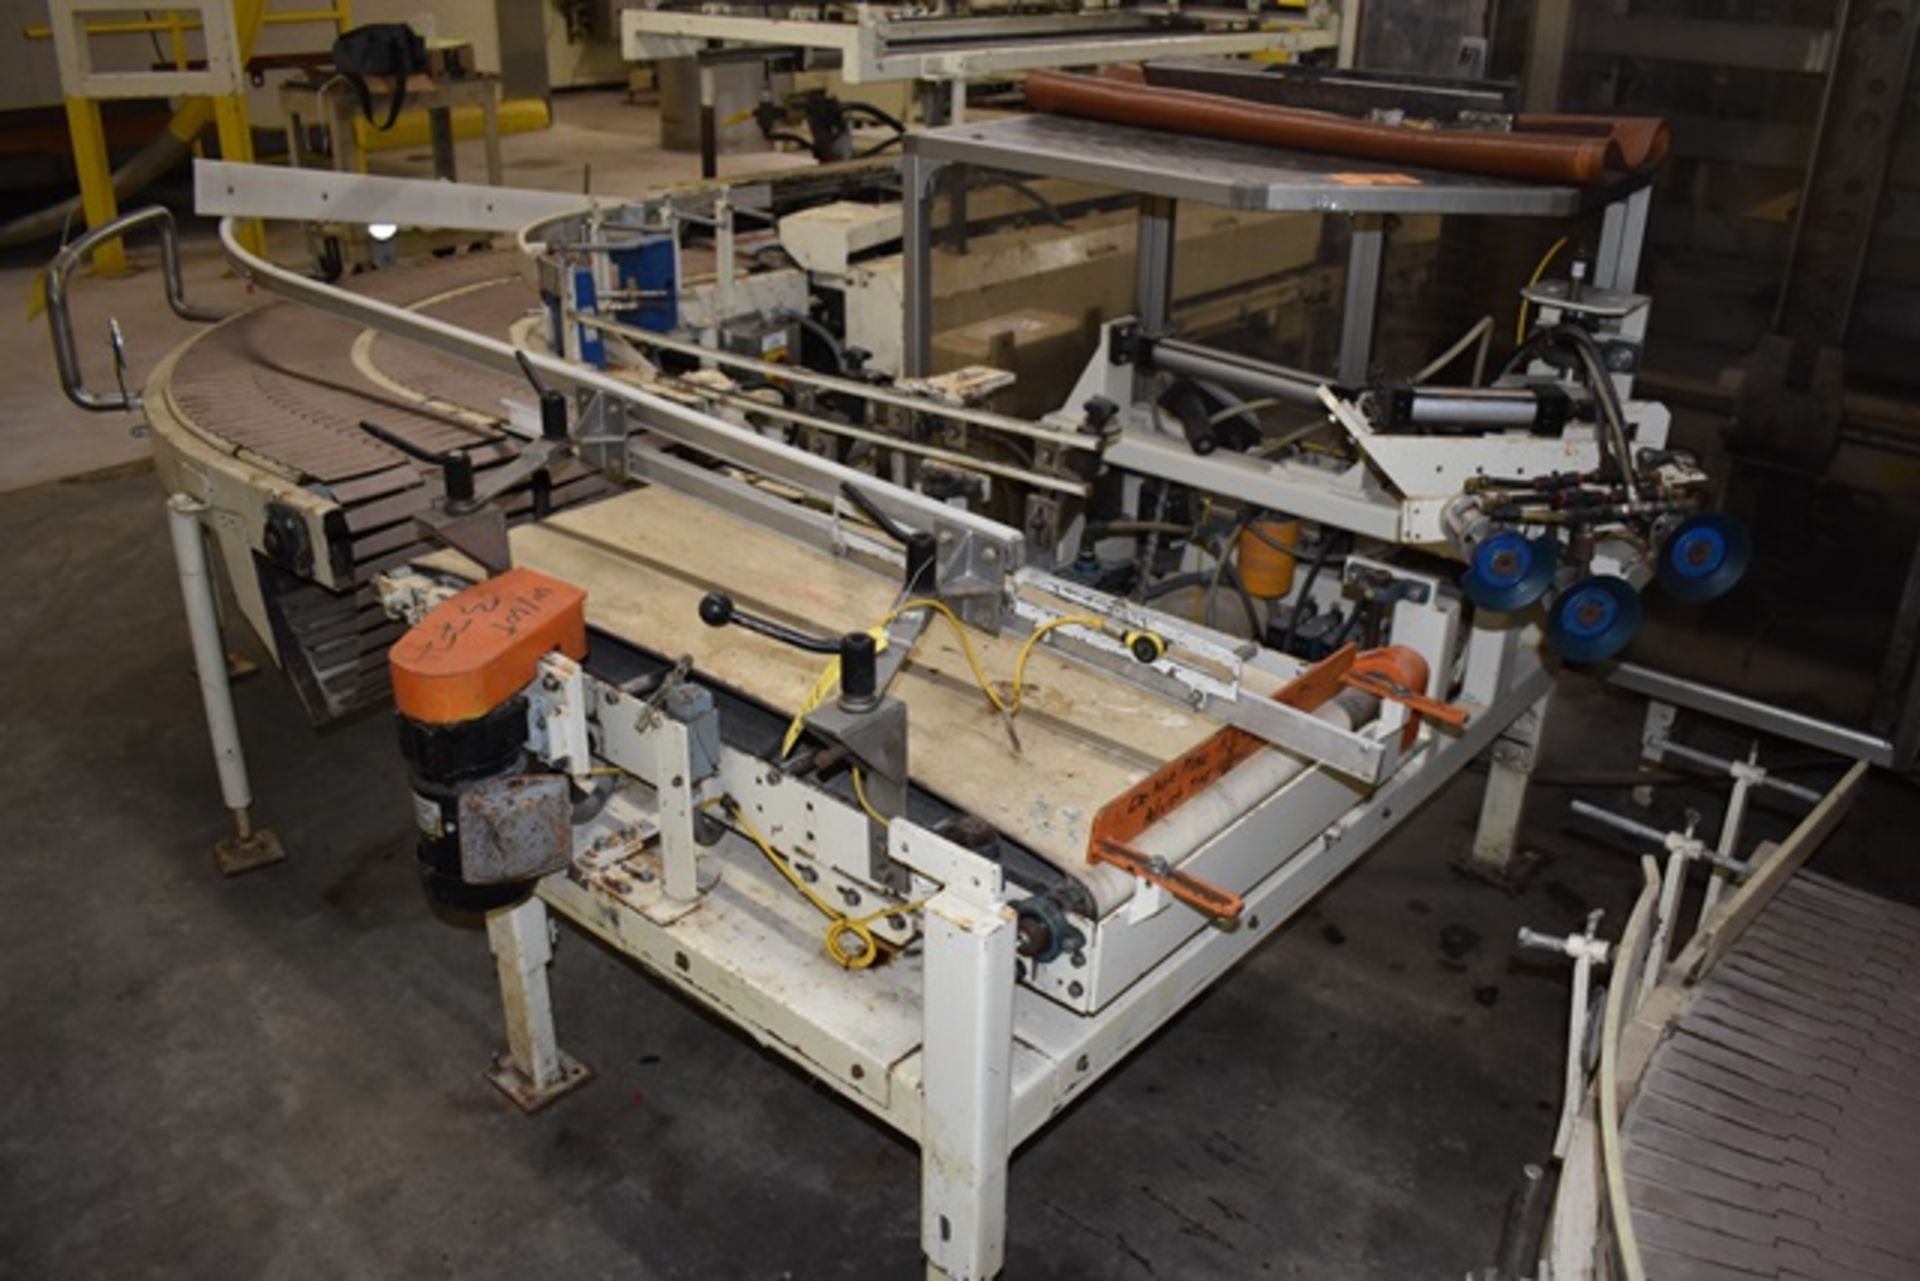 Package Machinery case positioner, model Dyna Pak, with head vacuum case pick up, 18"W x 48"L - Image 2 of 2